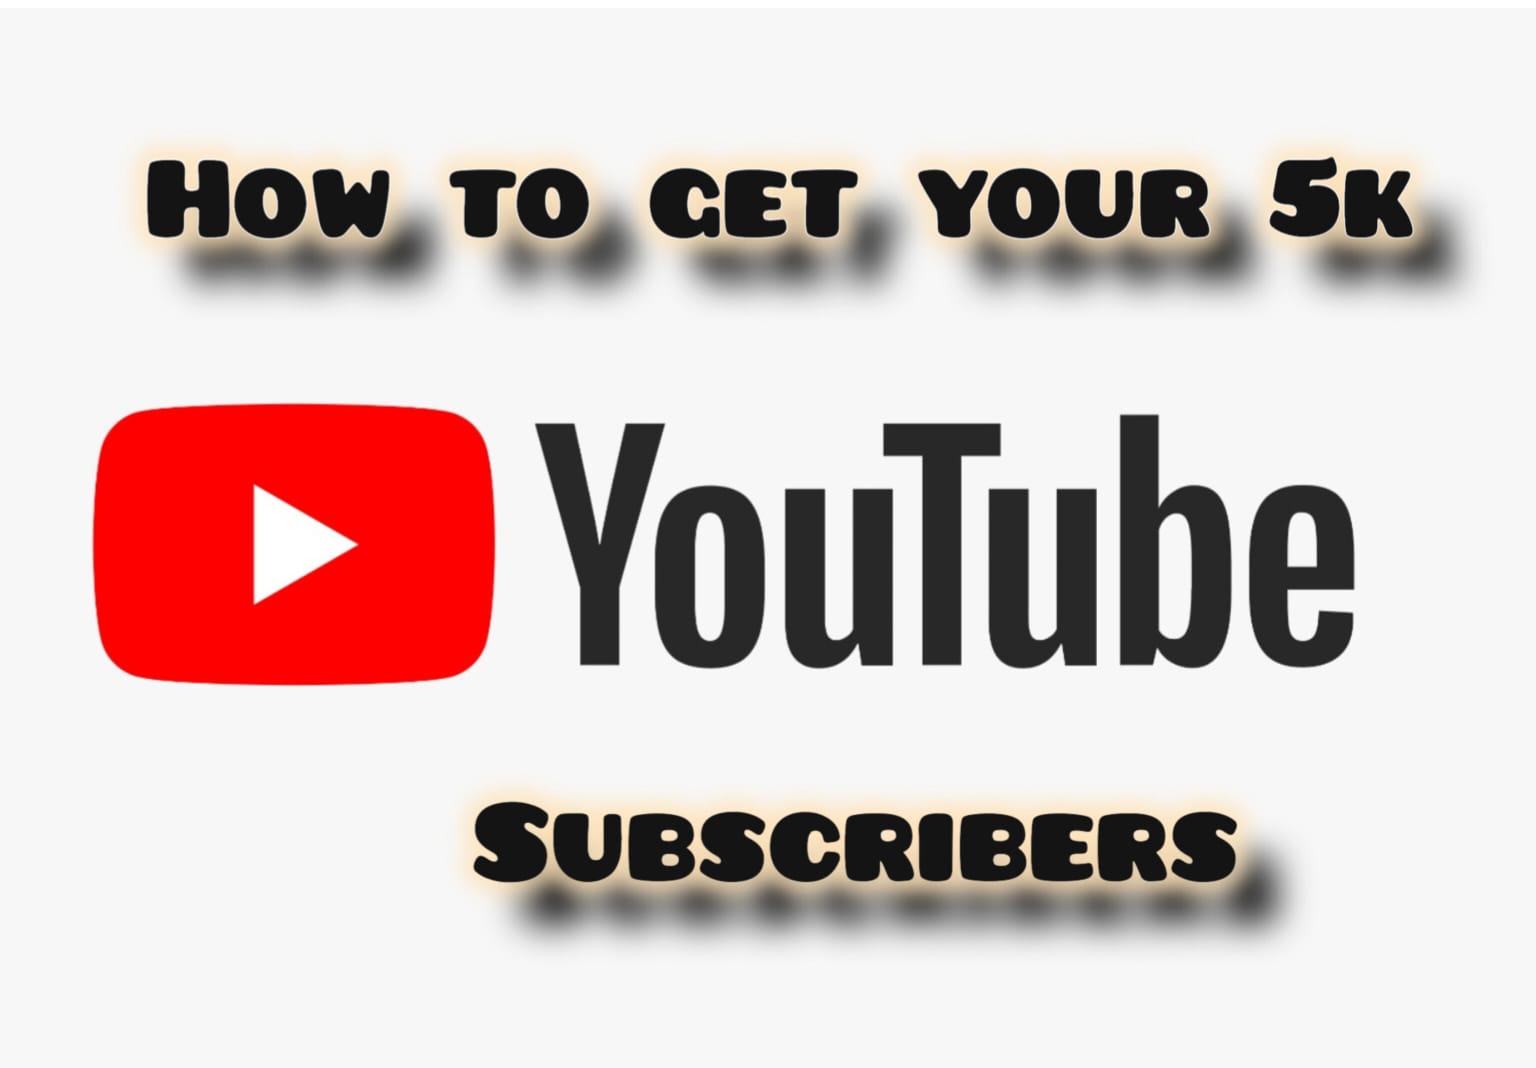 How to get your 5k youtube subscribers